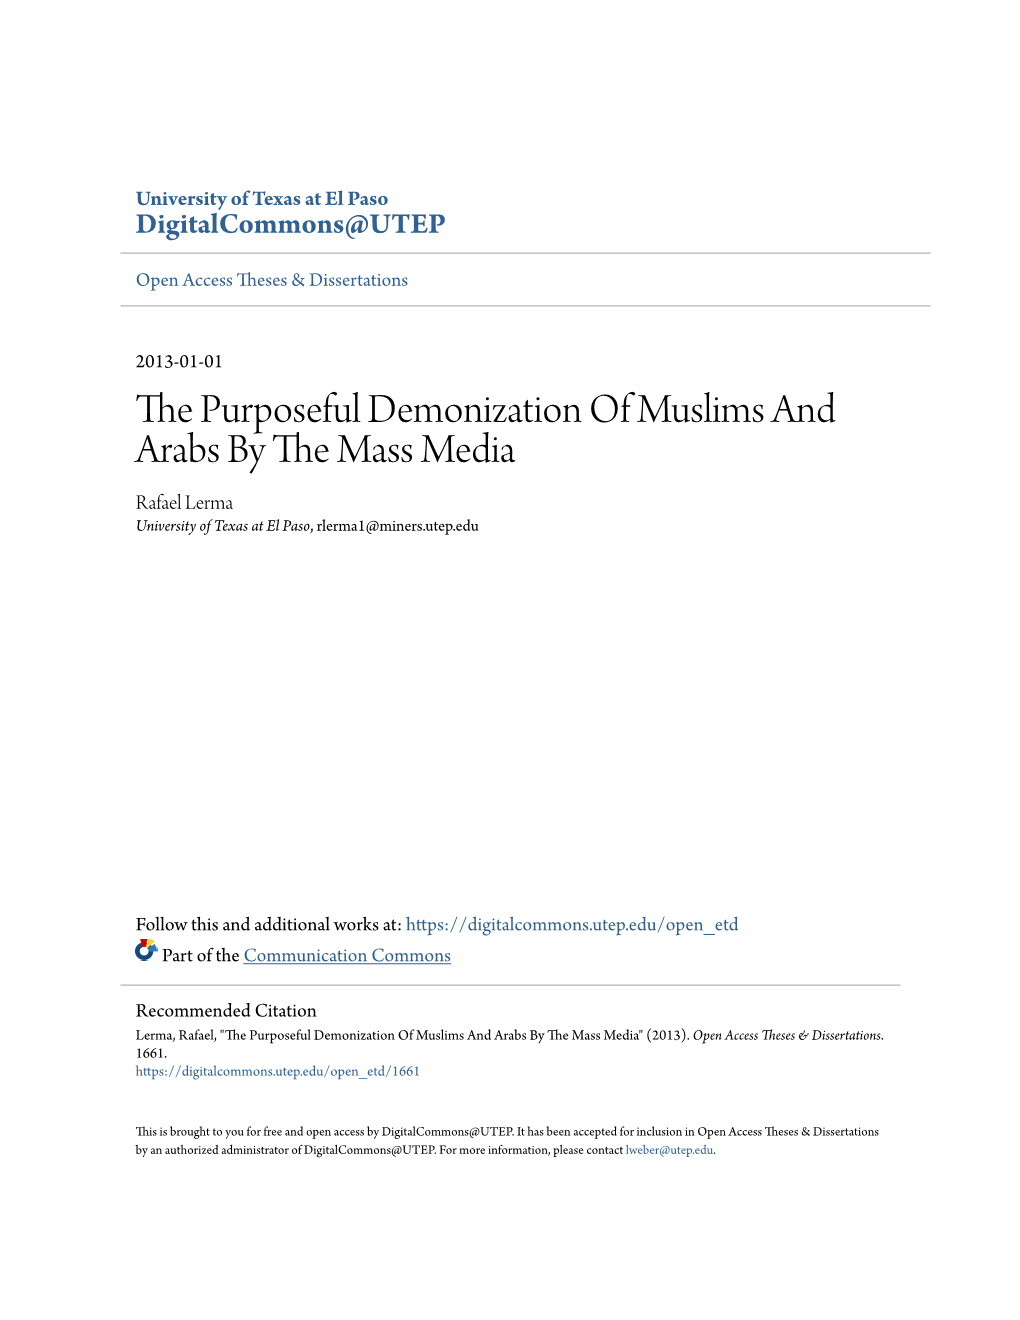 The Purposeful Demonization of Muslims and Arabs by the Mass Media